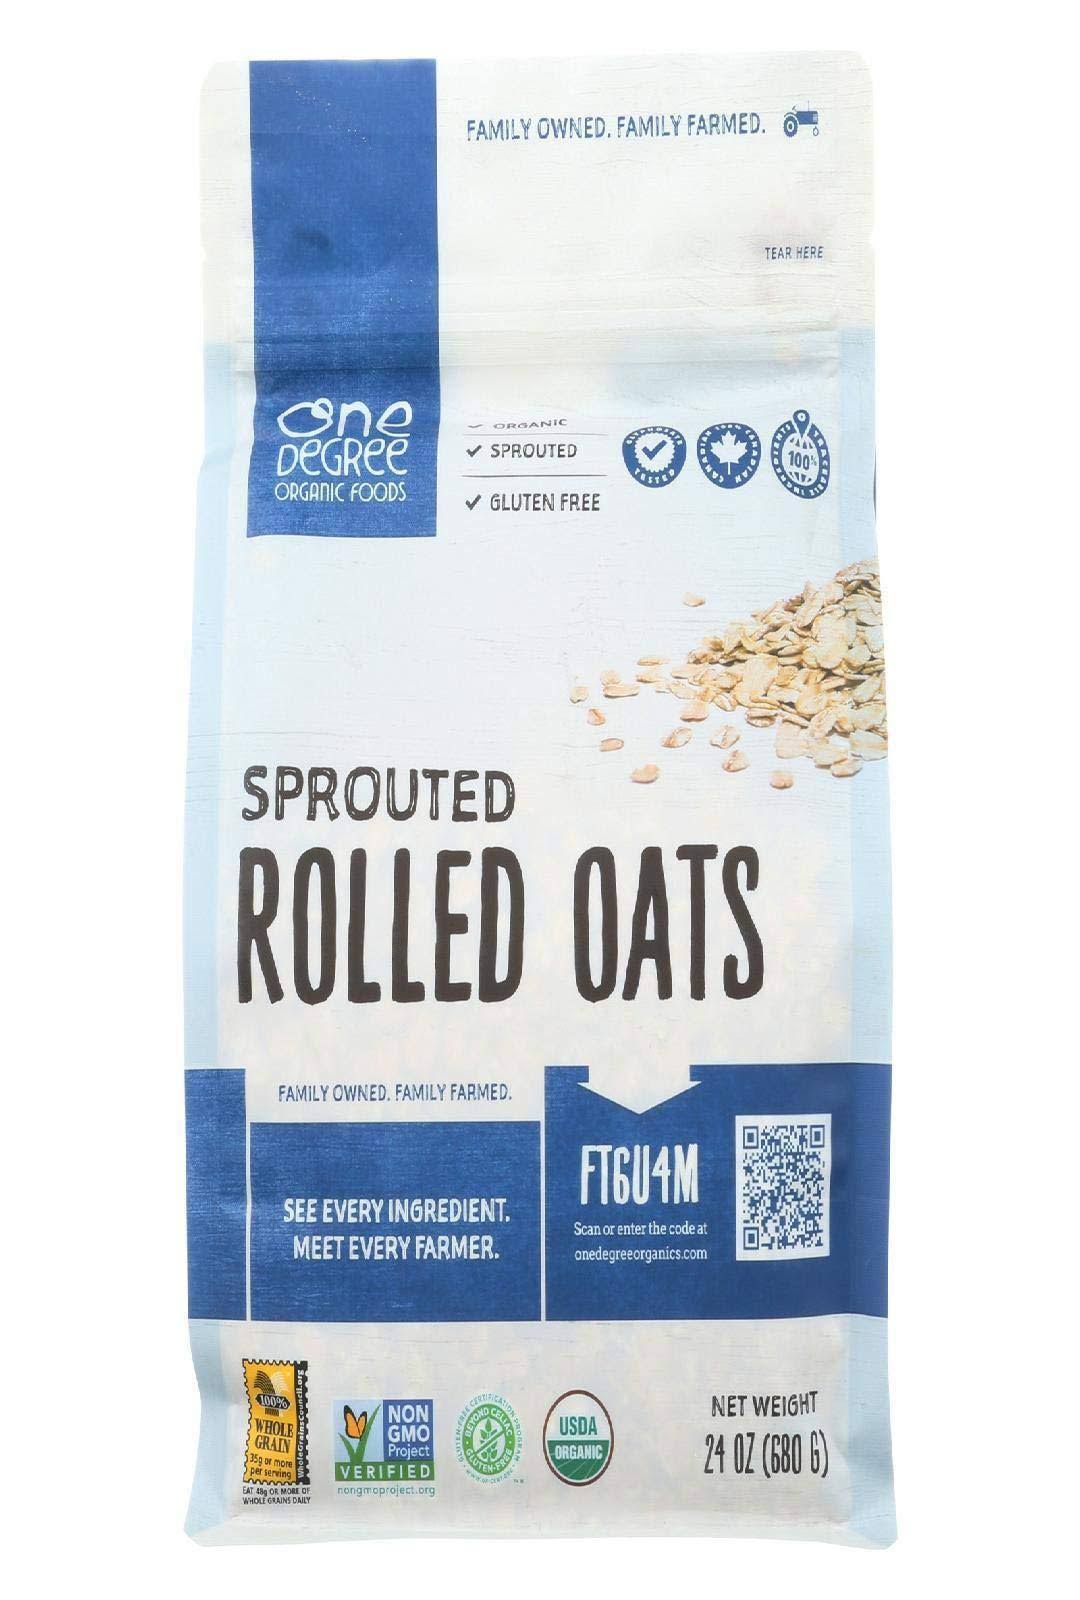 One Degree Organic Foods Organic Sprouted Rolled Oats, 24 oz